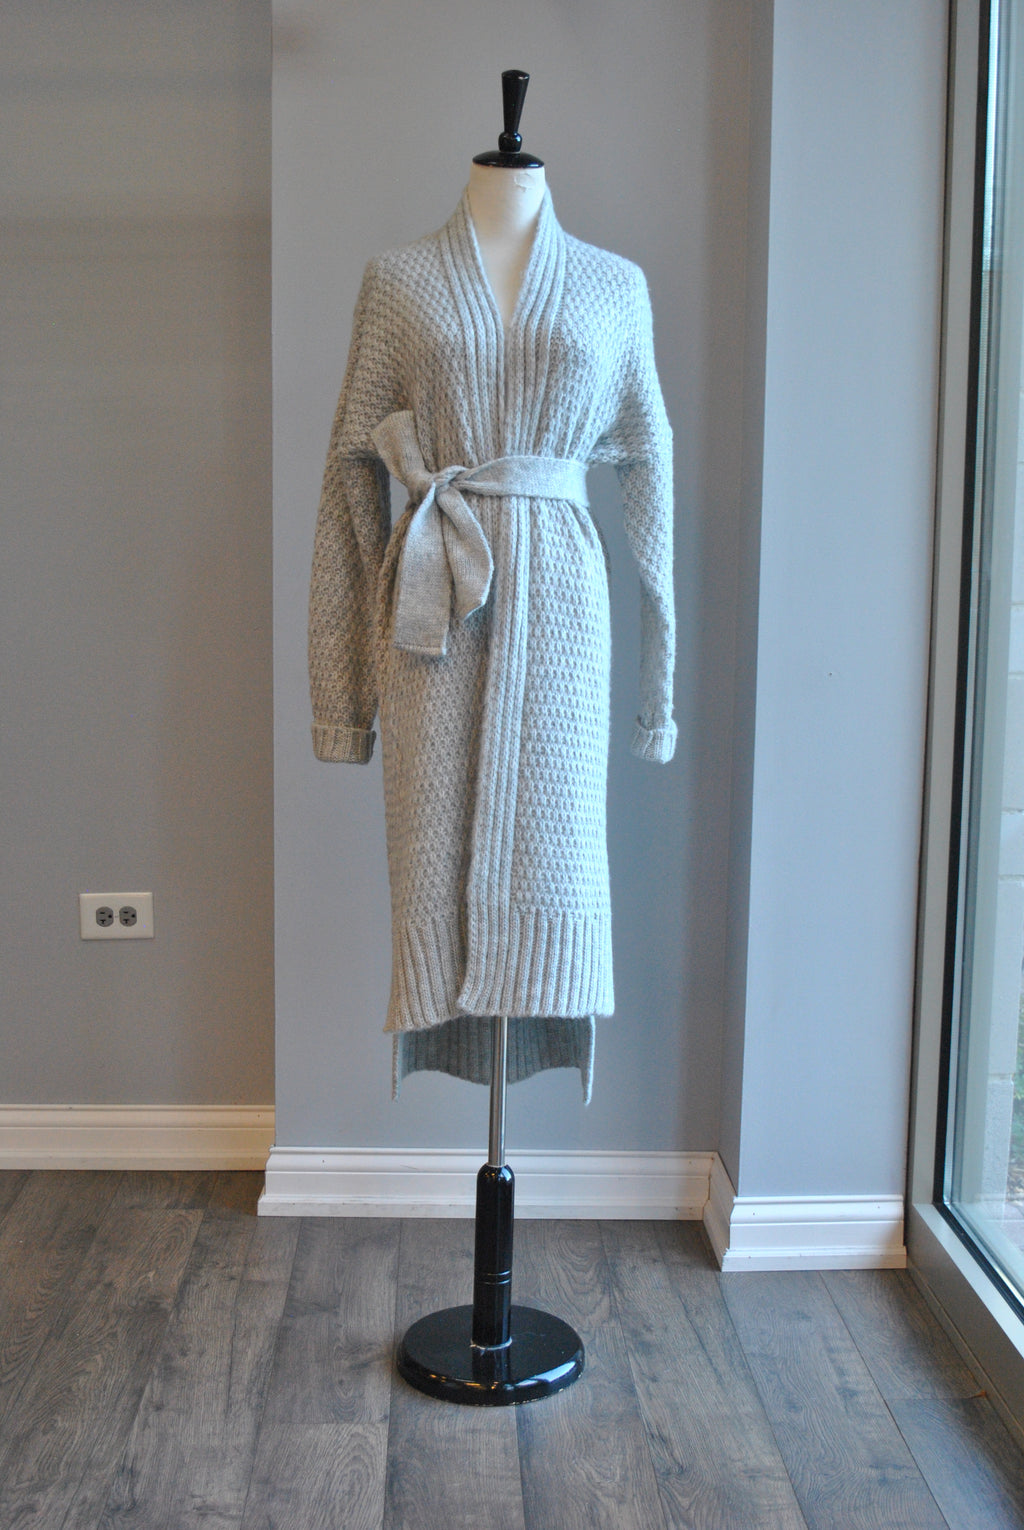 LIGHT GREY OPEN STYLE CARDIGAN WITH A BELT